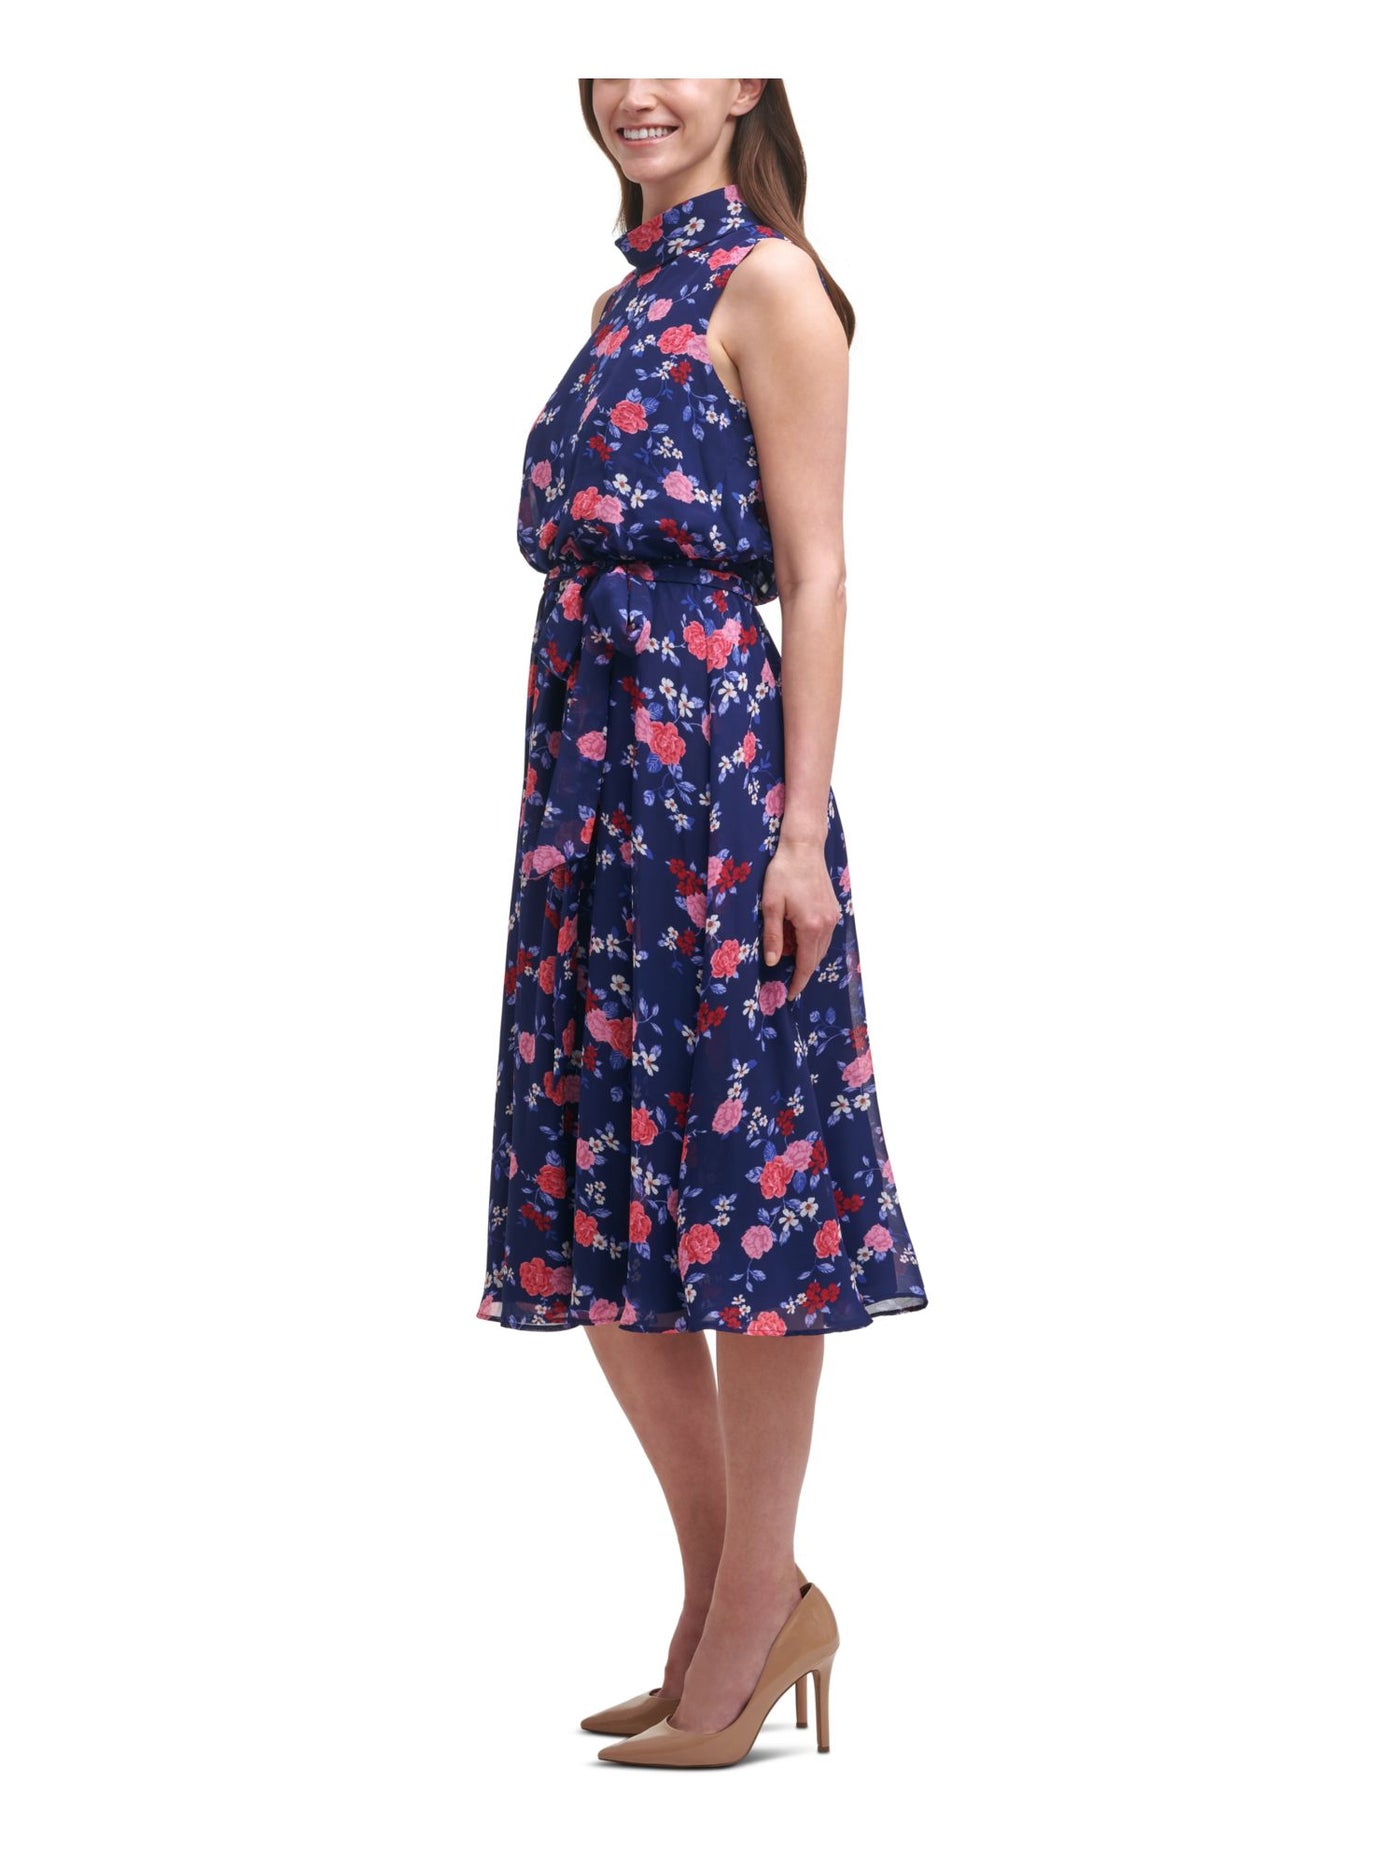 HARPER ROSE Womens Navy Zippered Belted Mock Roll-neck Chiffon Floral Sleeveless Midi Wear To Work Fit + Flare Dress 12